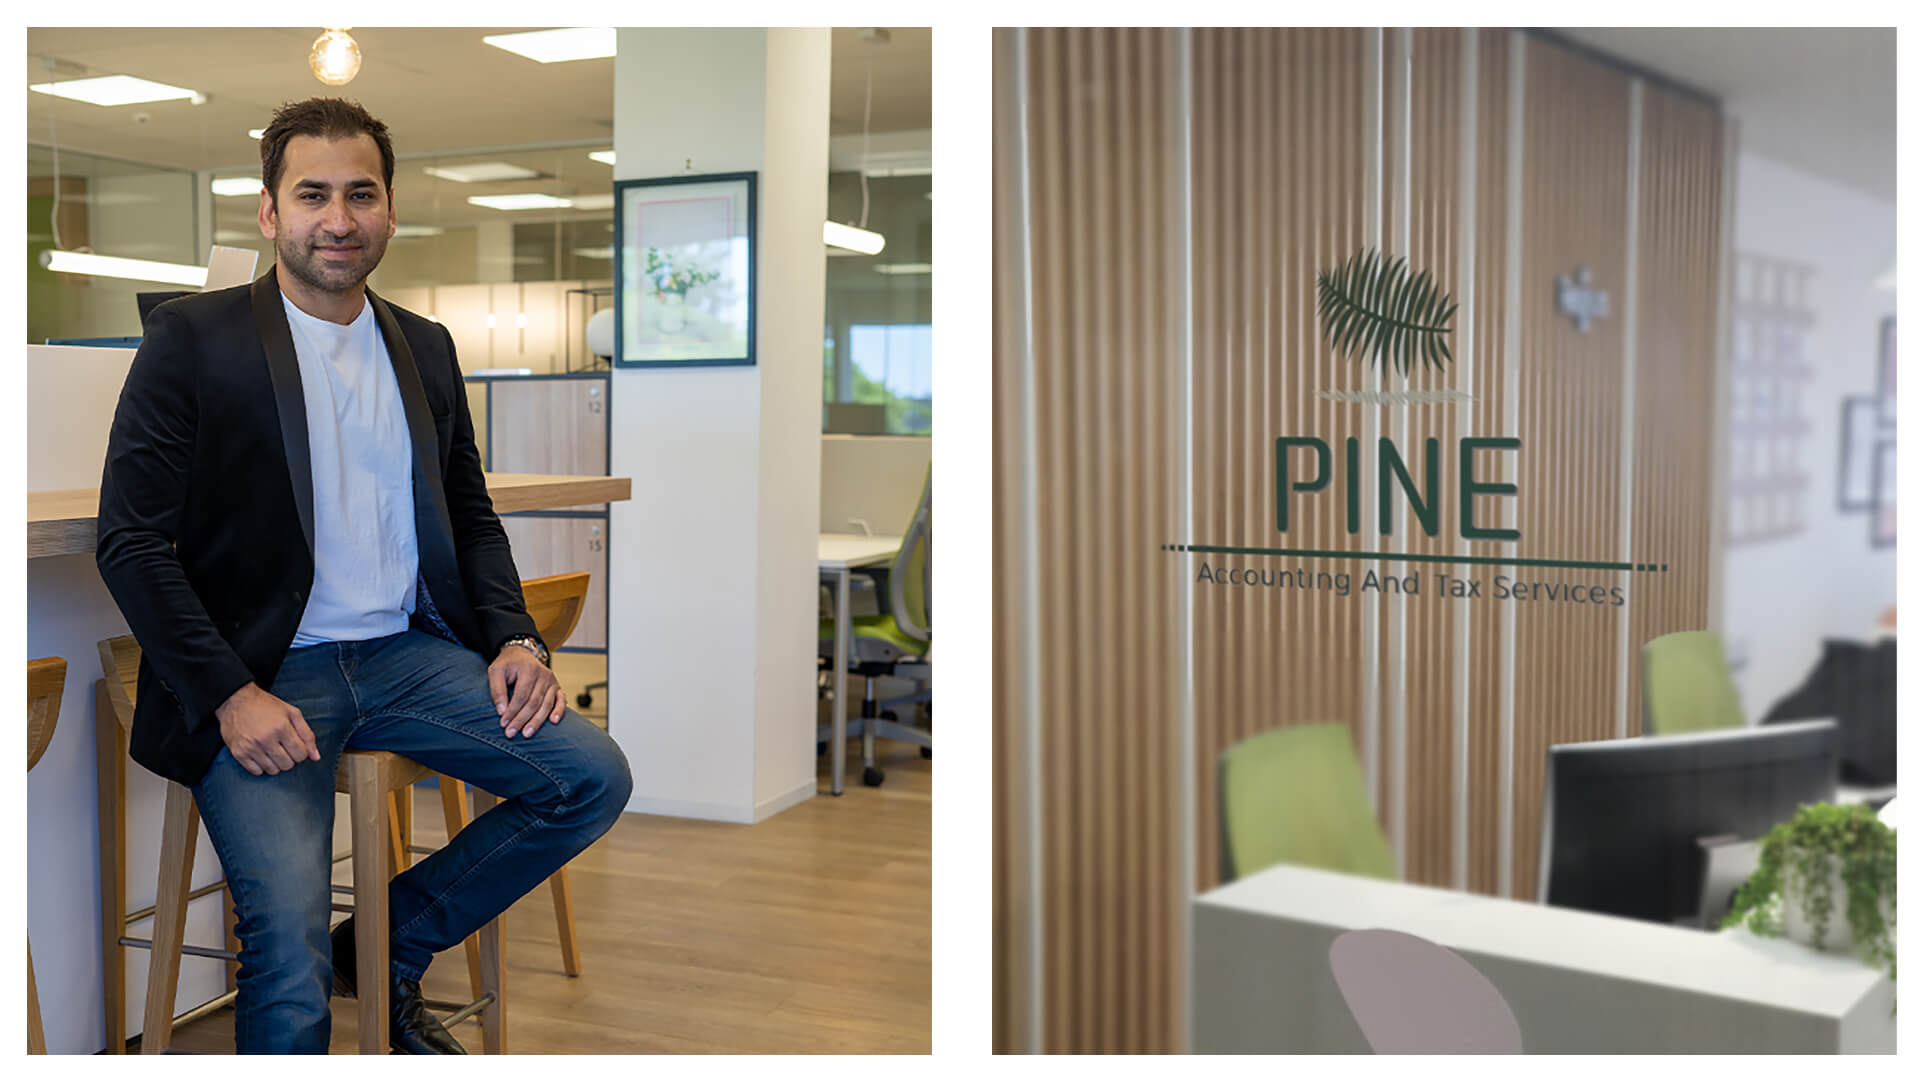 Two images side by side. Left: Hamza Maqbool the managing director of Pine Accounting. Right: the front door and reception area at Pine Accounting